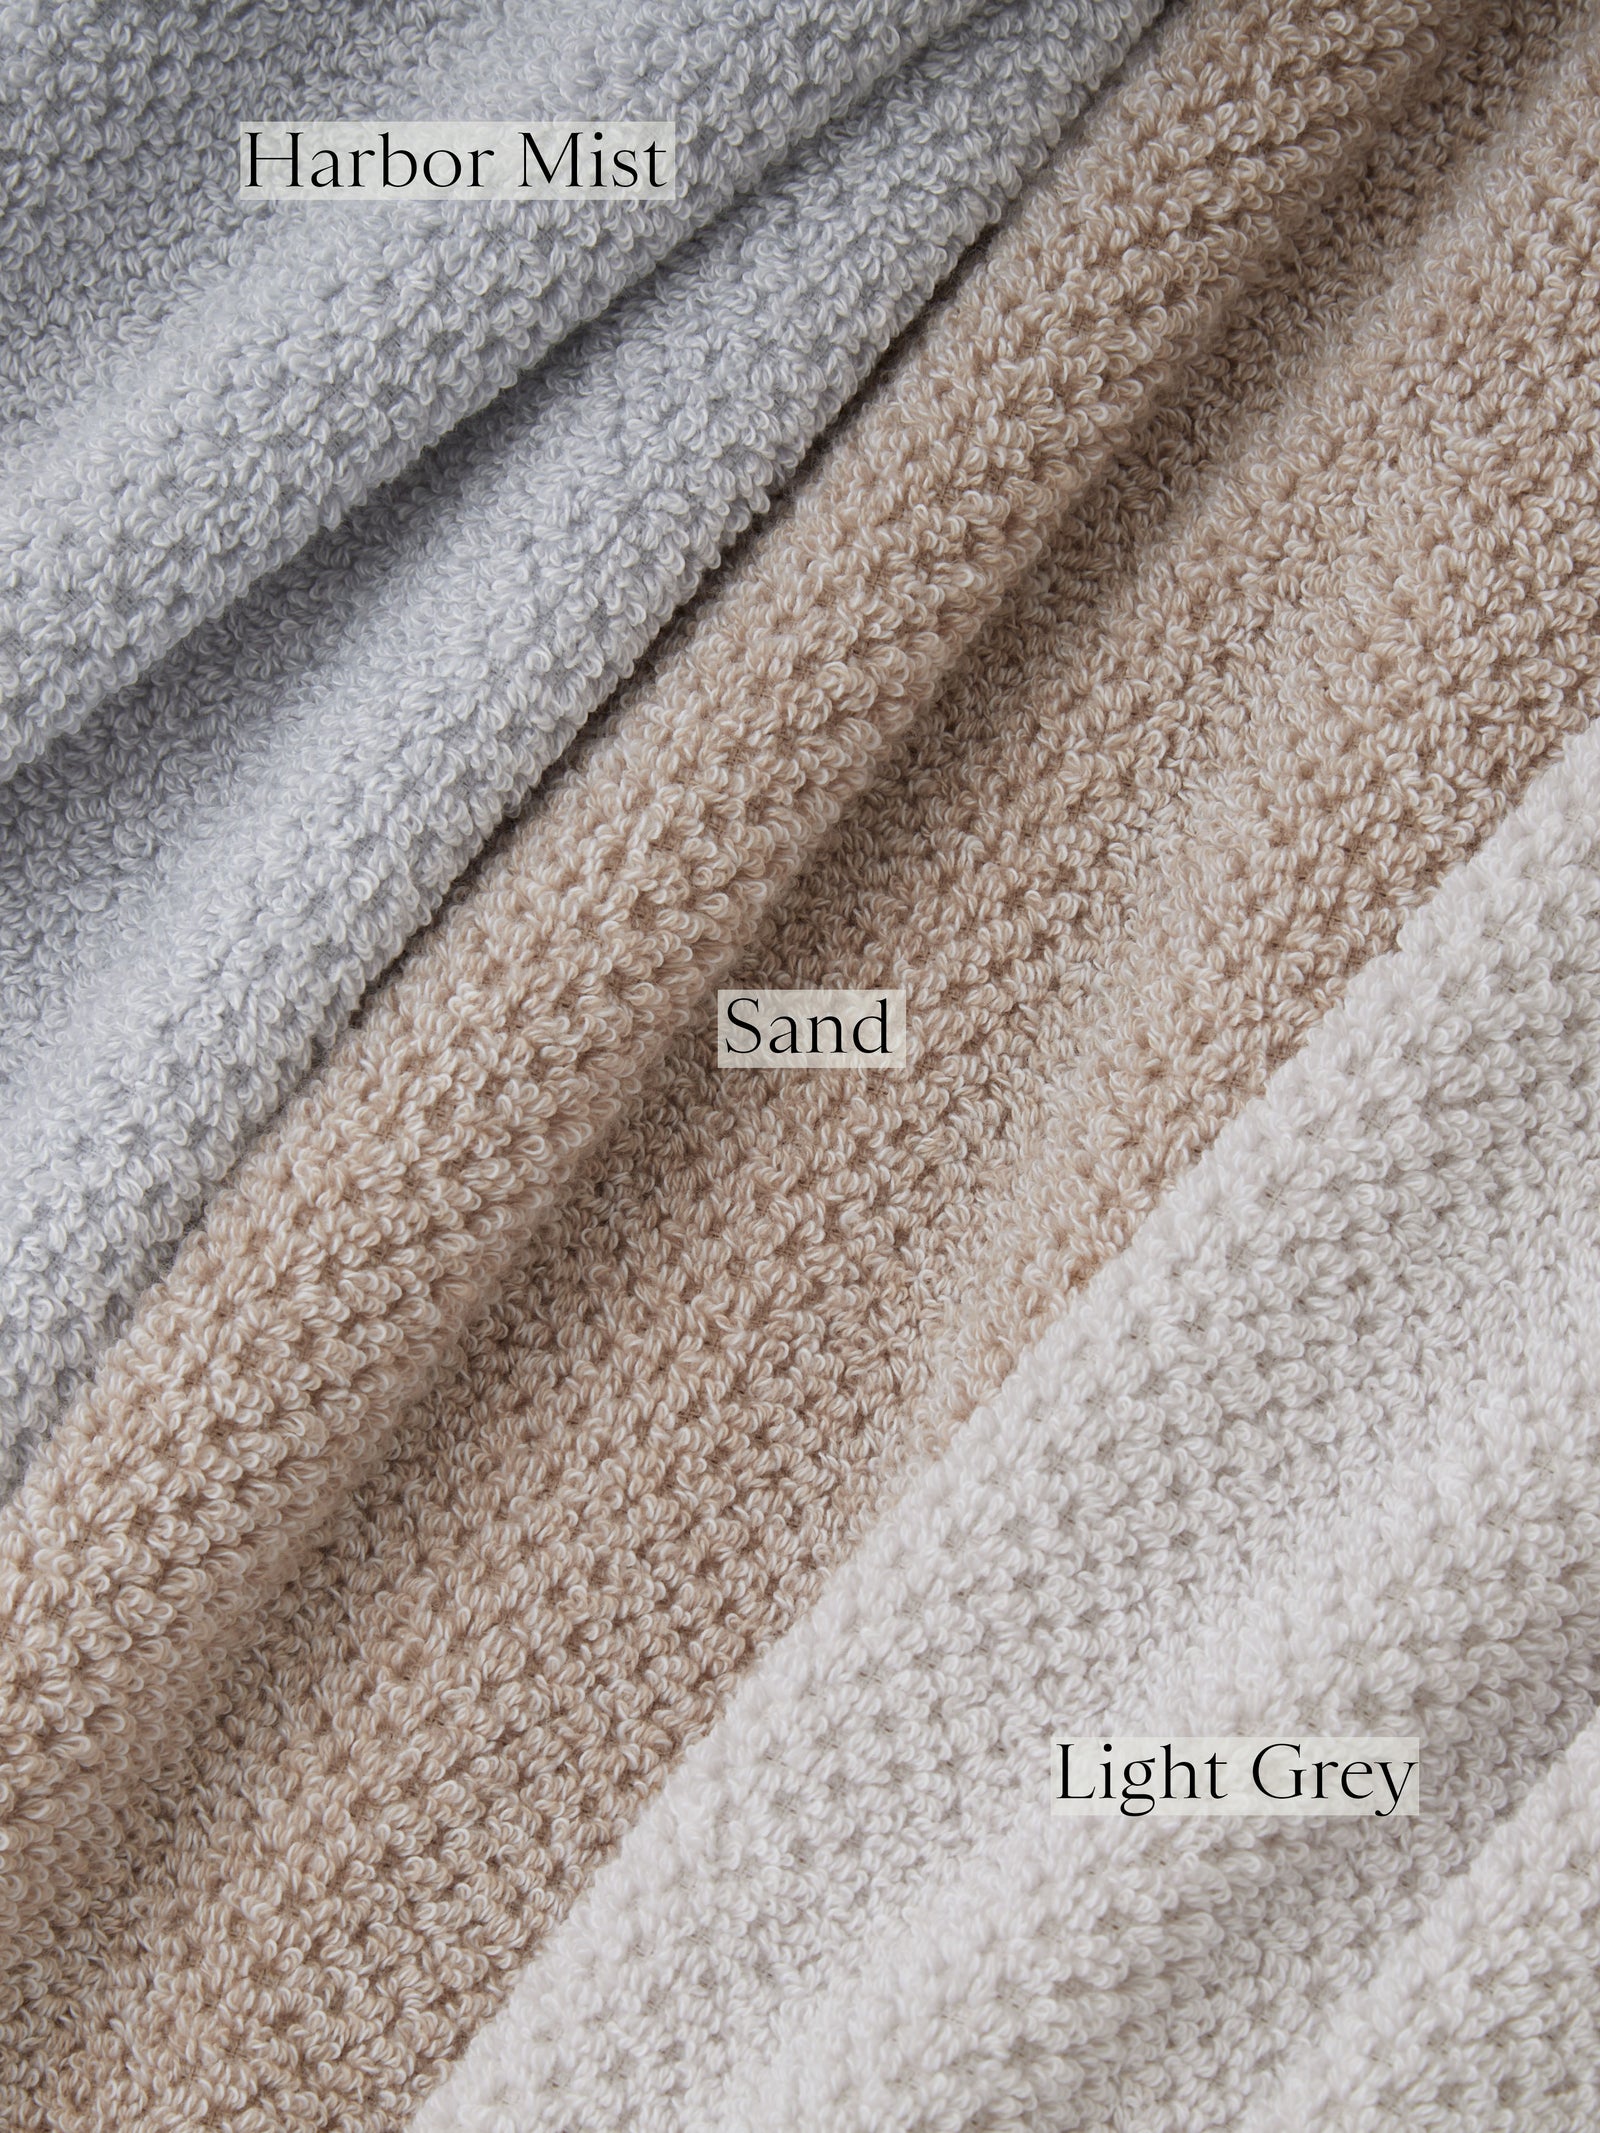 Nantucket Bath Sheets in the colors Heathered Light Grey, Heathered Sand, and Heathered Harbor Mist. Photo of Nantucket Bath Sheets taken as a close up of the Bath Sheets. Only the Bath Sheets can be seen.